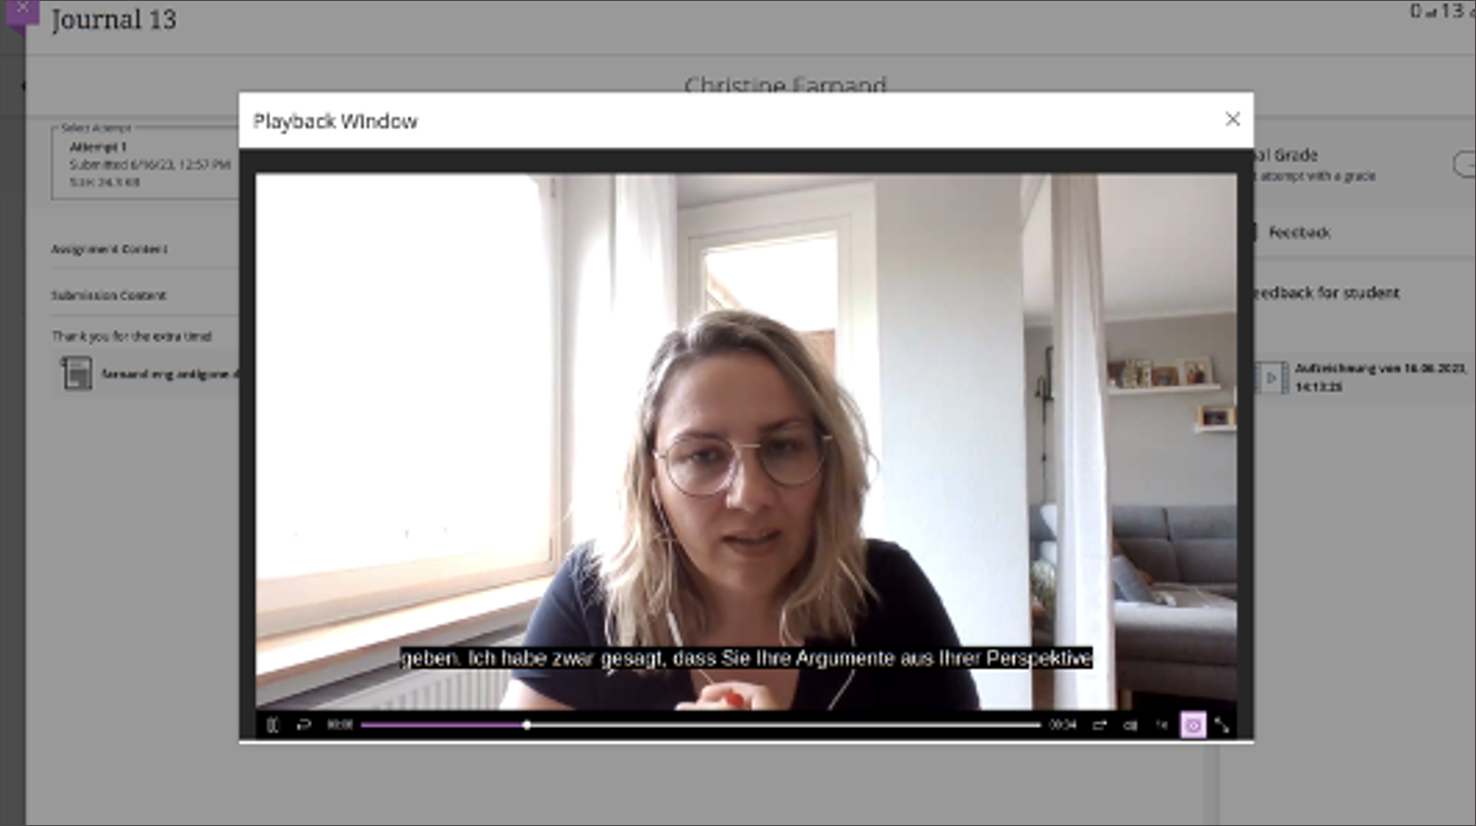 screenshot of video feedback with captions visible